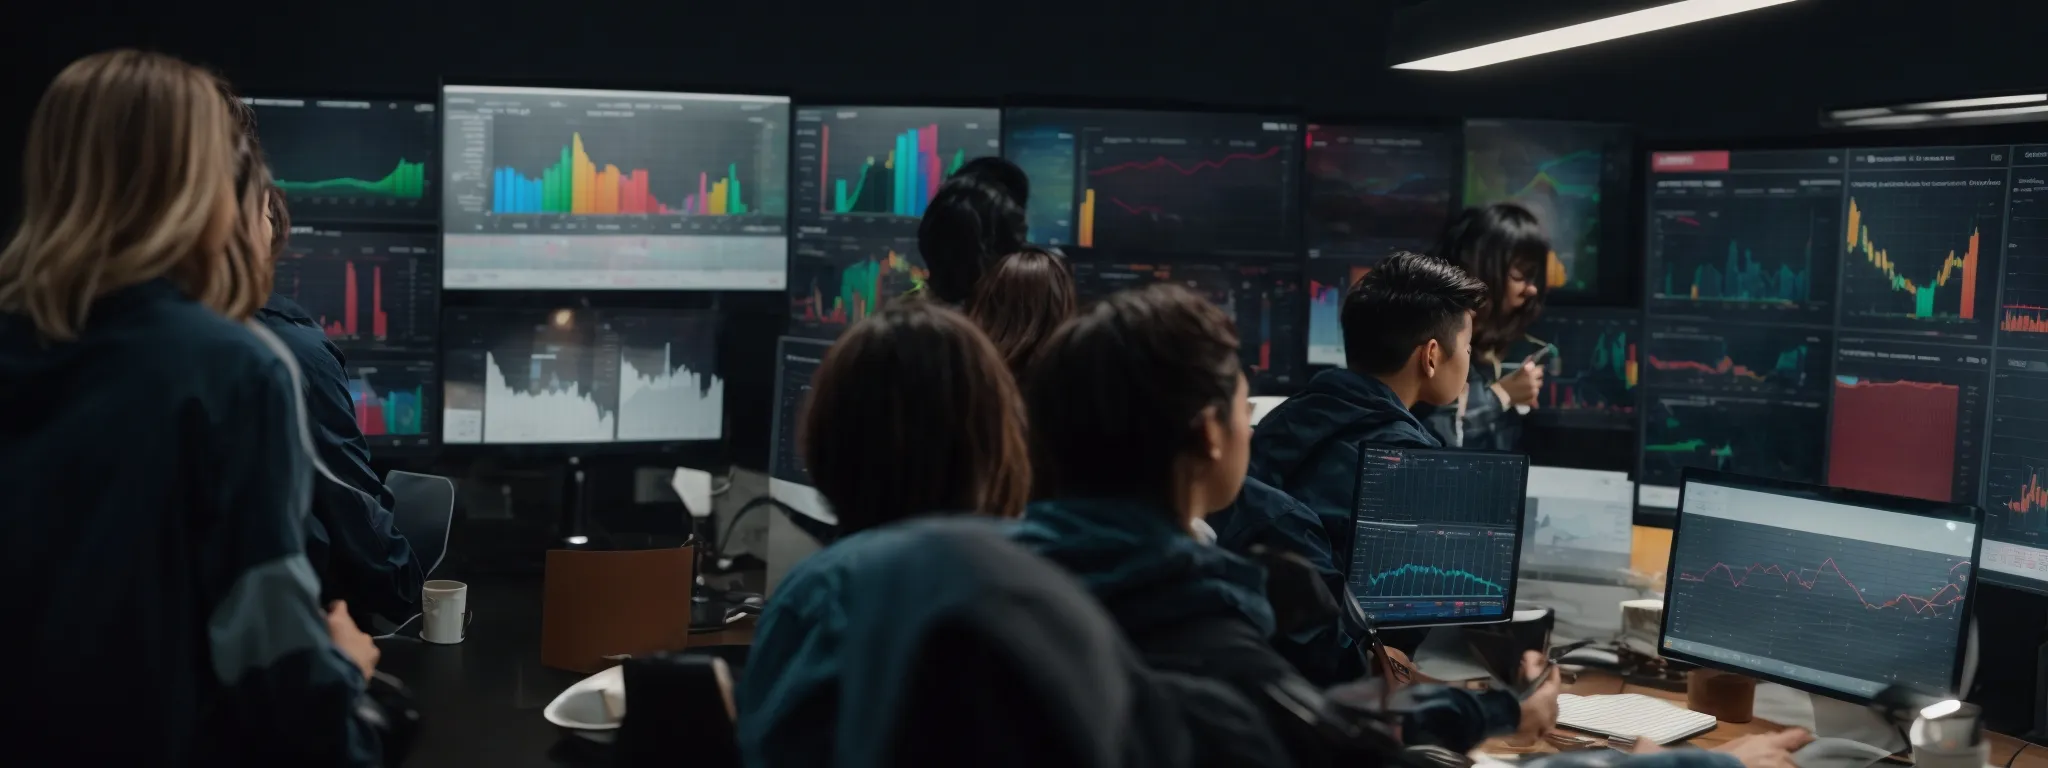 a group of marketers gathered around a computer displaying colorful graphs and data analytics on keyword trends.